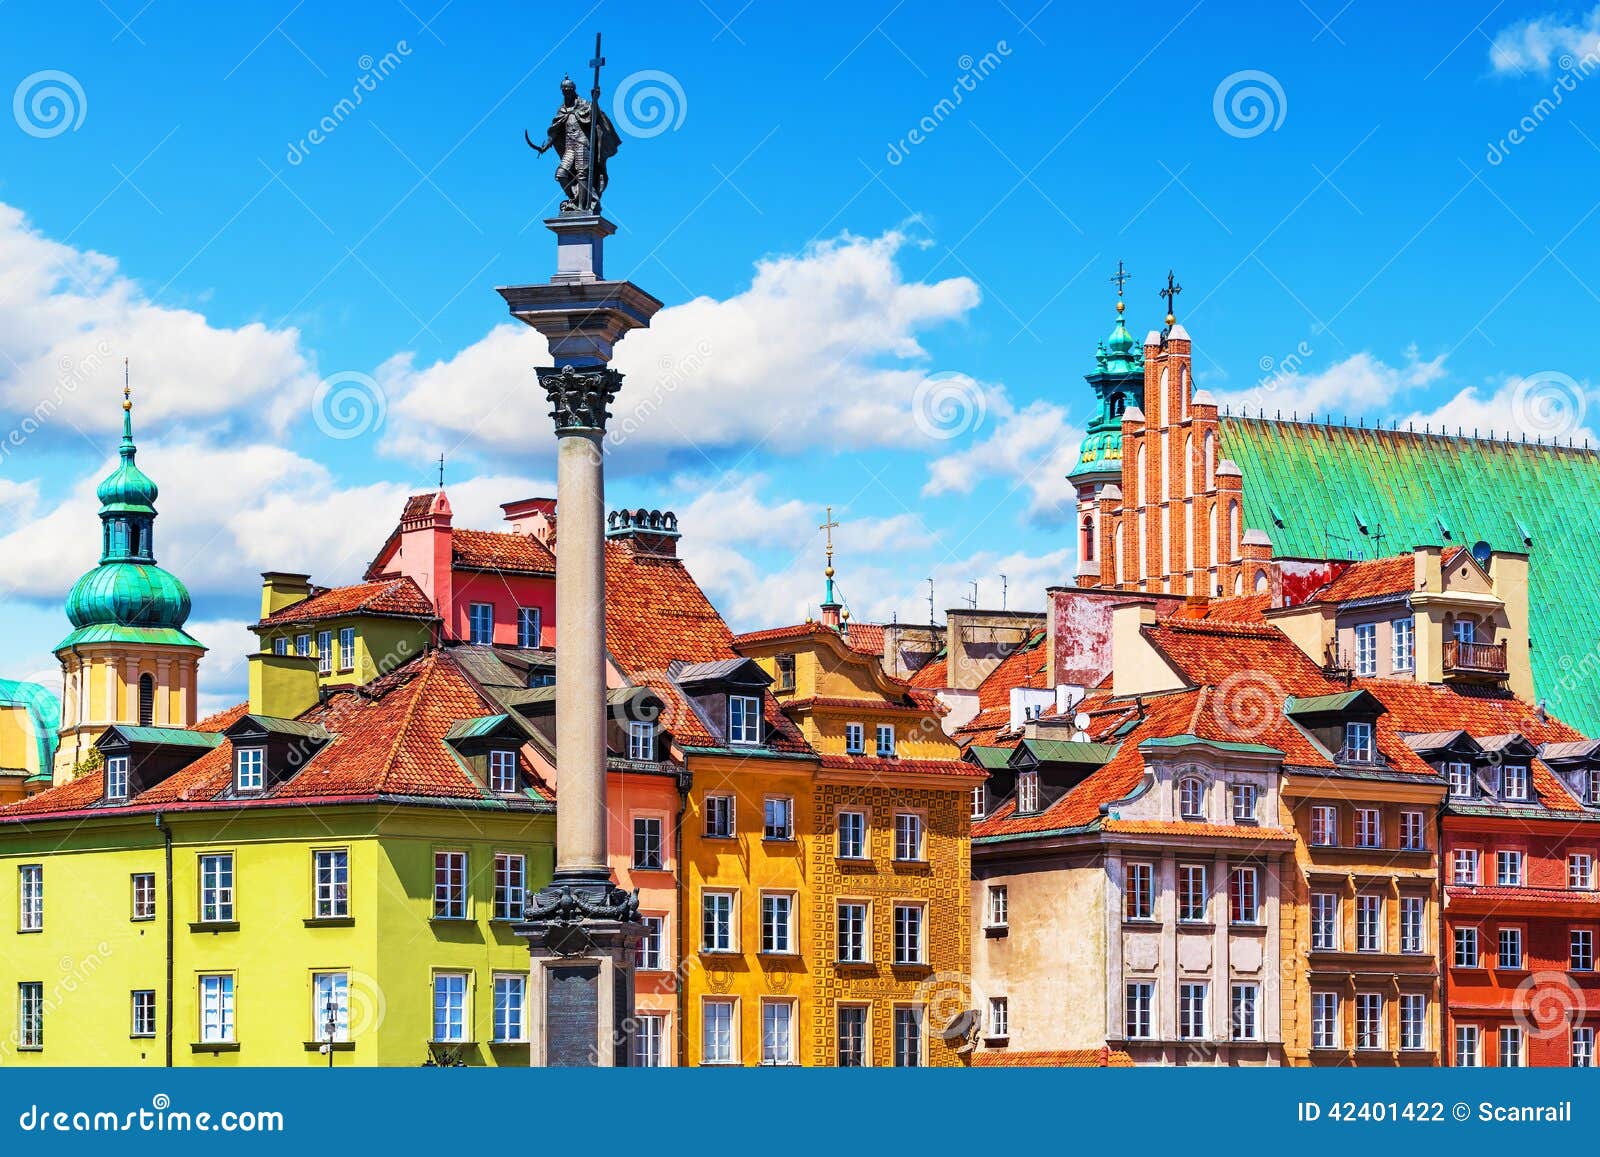 old town in warsaw, poland